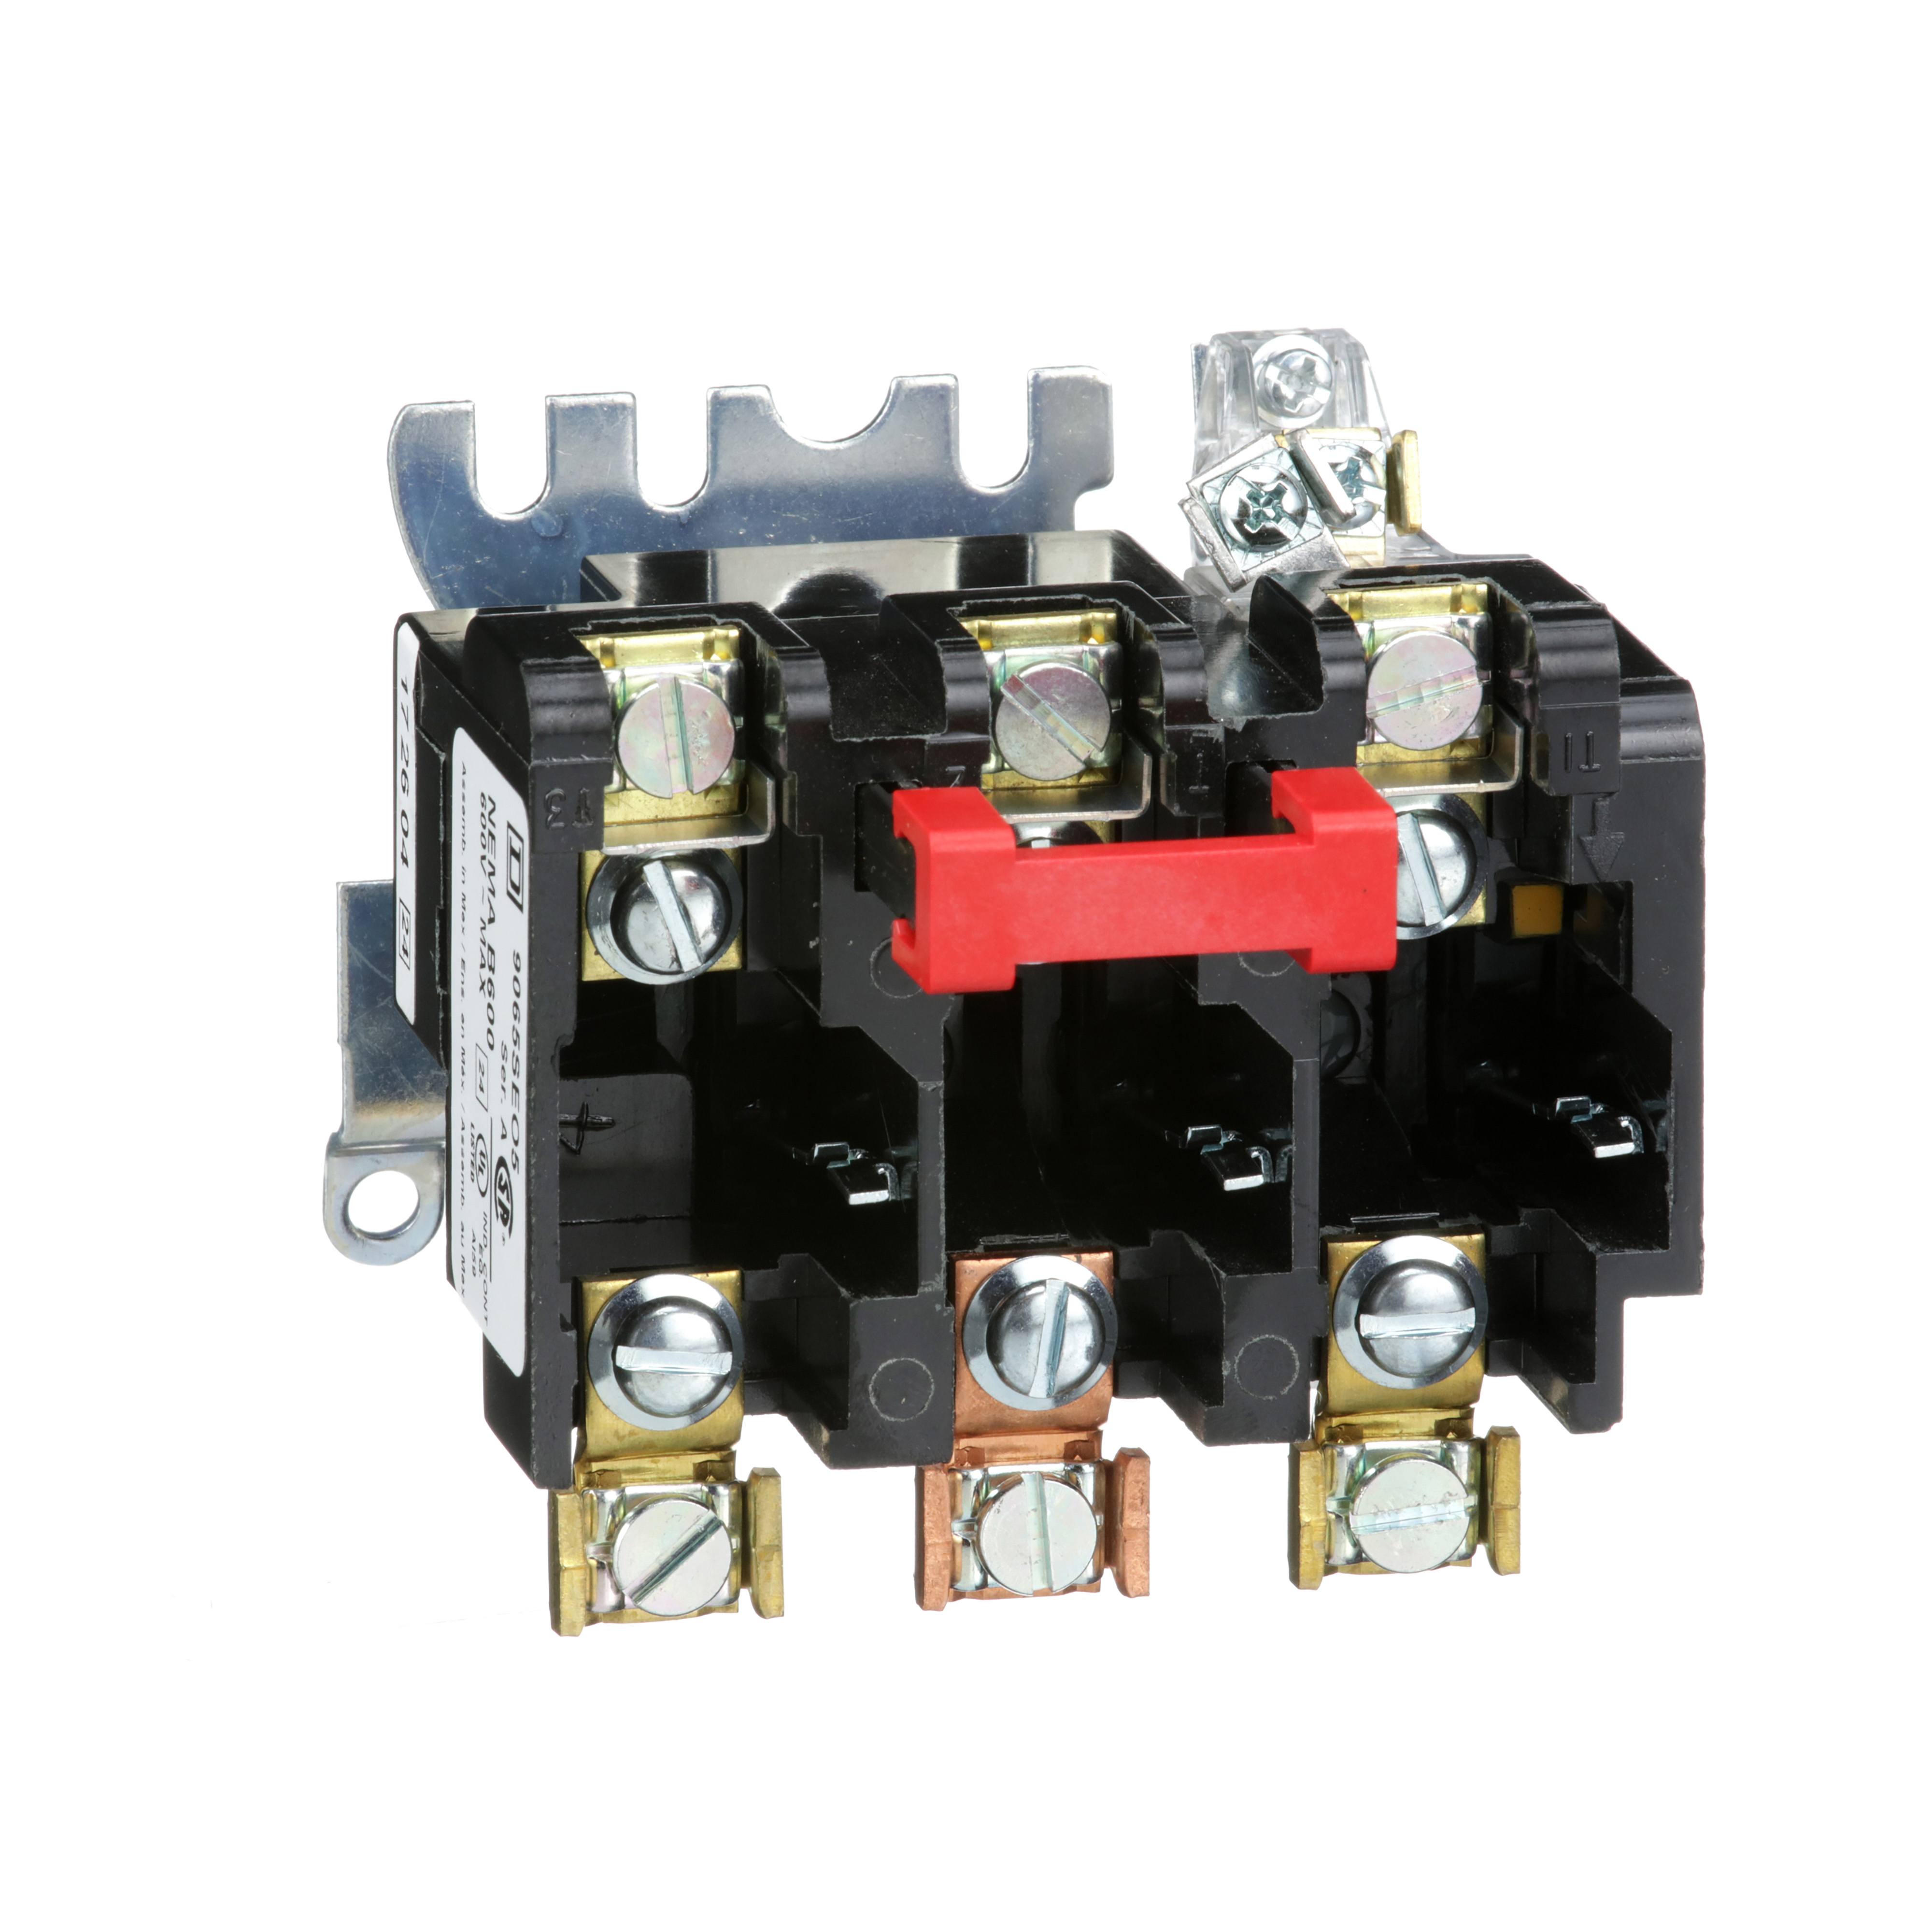 SQUARE D 9065SEO5 : MELTING ALLOY OVERLOAD RELAY 600V 26A